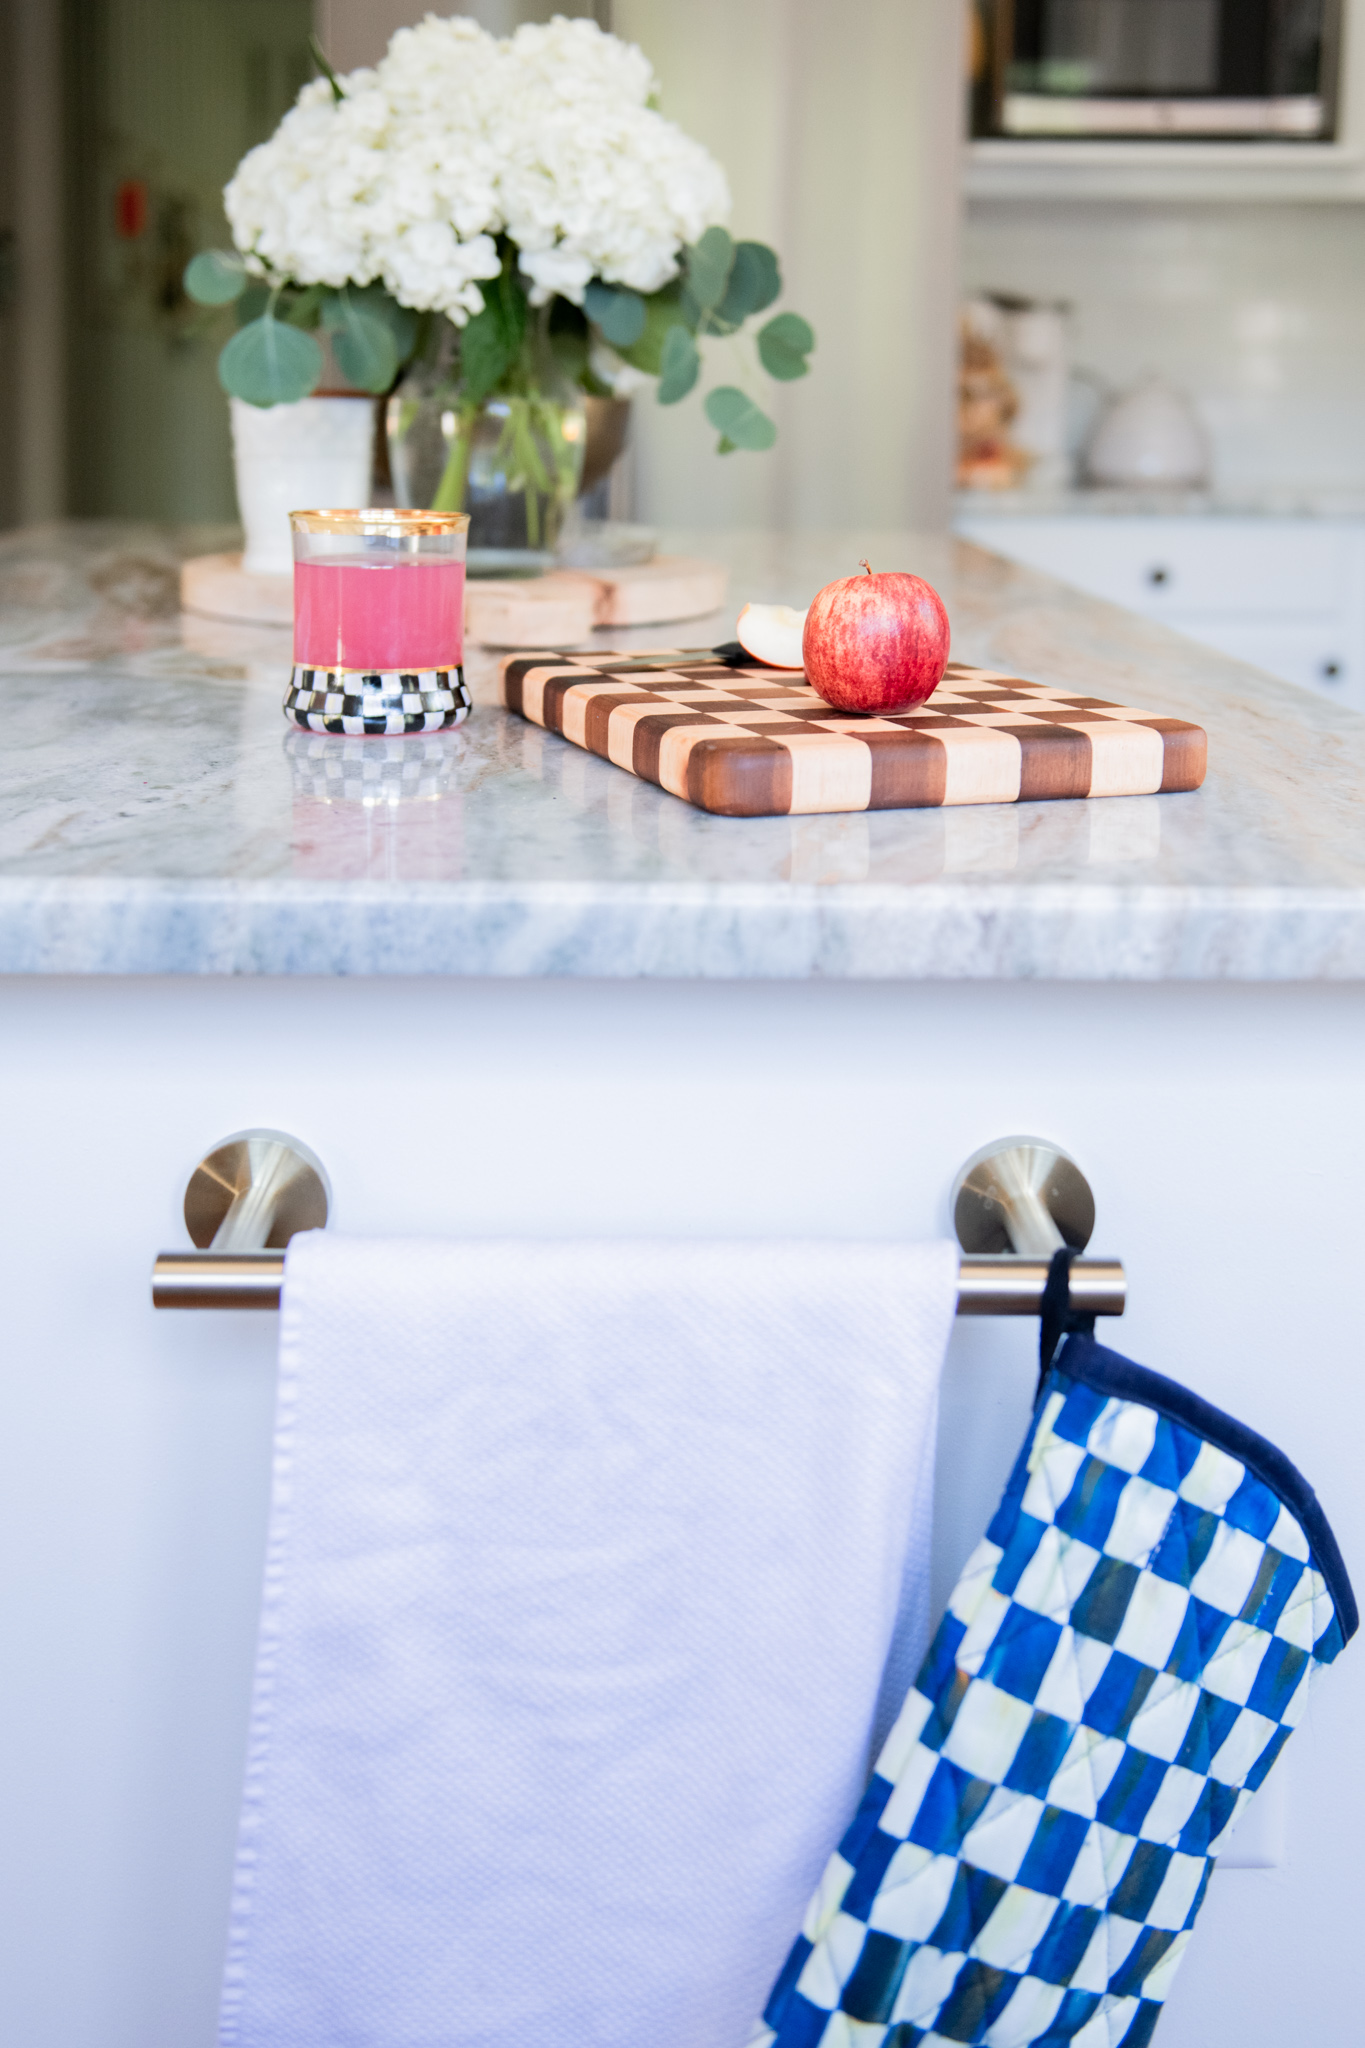 Mackenzie-Childs by popular Ohio life and style blog, Coffee Beans and Bobby Pins: image of Mackenzie-Childs Courtly cutting board and Mackenzie-Childs Royal Check Bistro Oven Mitt.